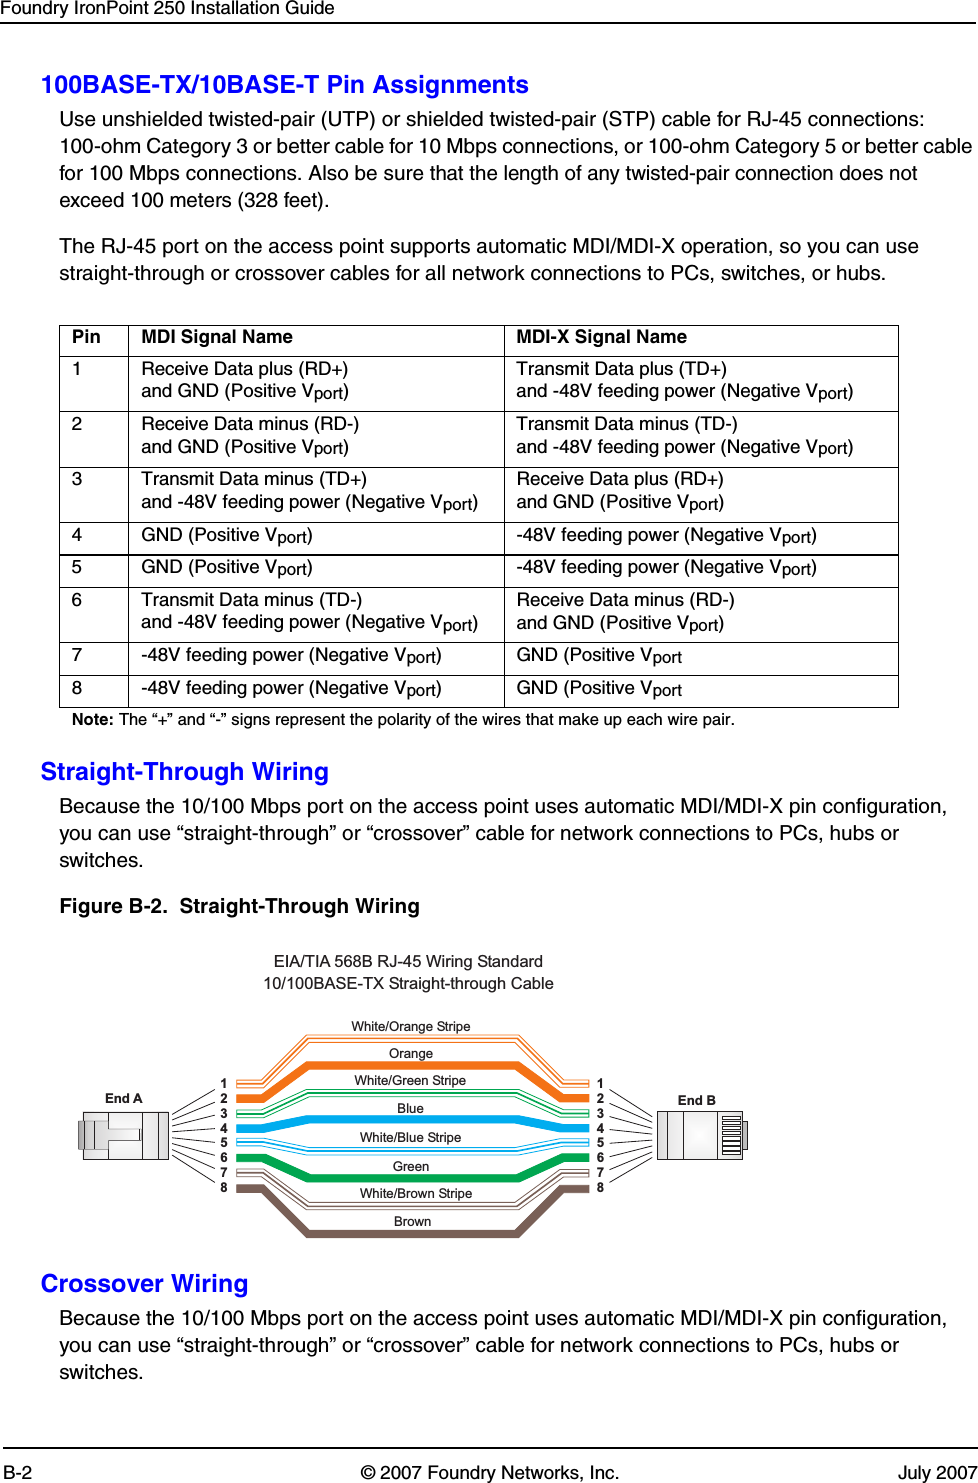 Foundry IronPoint 250 Installation GuideB-2 © 2007 Foundry Networks, Inc. July 2007100BASE-TX/10BASE-T Pin AssignmentsUse unshielded twisted-pair (UTP) or shielded twisted-pair (STP) cable for RJ-45 connections: 100-ohm Category 3 or better cable for 10 Mbps connections, or 100-ohm Category 5 or better cable for 100 Mbps connections. Also be sure that the length of any twisted-pair connection does not exceed 100 meters (328 feet).The RJ-45 port on the access point supports automatic MDI/MDI-X operation, so you can use straight-through or crossover cables for all network connections to PCs, switches, or hubs.Straight-Through WiringBecause the 10/100 Mbps port on the access point uses automatic MDI/MDI-X pin configuration, you can use “straight-through” or “crossover” cable for network connections to PCs, hubs or switches. Figure B-2.  Straight-Through WiringCrossover WiringBecause the 10/100 Mbps port on the access point uses automatic MDI/MDI-X pin configuration, you can use “straight-through” or “crossover” cable for network connections to PCs, hubs or switches. Pin MDI Signal Name MDI-X Signal Name1 Receive Data plus (RD+) and GND (Positive Vport)Transmit Data plus (TD+) and -48V feeding power (Negative Vport)2 Receive Data minus (RD-) and GND (Positive Vport)Transmit Data minus (TD-) and -48V feeding power (Negative Vport)3 Transmit Data minus (TD+) and -48V feeding power (Negative Vport)Receive Data plus (RD+) and GND (Positive Vport)4 GND (Positive Vport) -48V feeding power (Negative Vport)5 GND (Positive Vport) -48V feeding power (Negative Vport)6 Transmit Data minus (TD-) and -48V feeding power (Negative Vport)Receive Data minus (RD-)and GND (Positive Vport)7 -48V feeding power (Negative Vport) GND (Positive Vport8 -48V feeding power (Negative Vport) GND (Positive VportNote: The “+” and “-” signs represent the polarity of the wires that make up each wire pair.White/Orange StripeOrangeWhite/Green StripeGreen1234567812345678EIA/TIA 568B RJ-45 Wiring Standard10/100BASE-TX Straight-through CableEnd A End BBlueWhite/Blue StripeBrownWhite/Brown Stripe